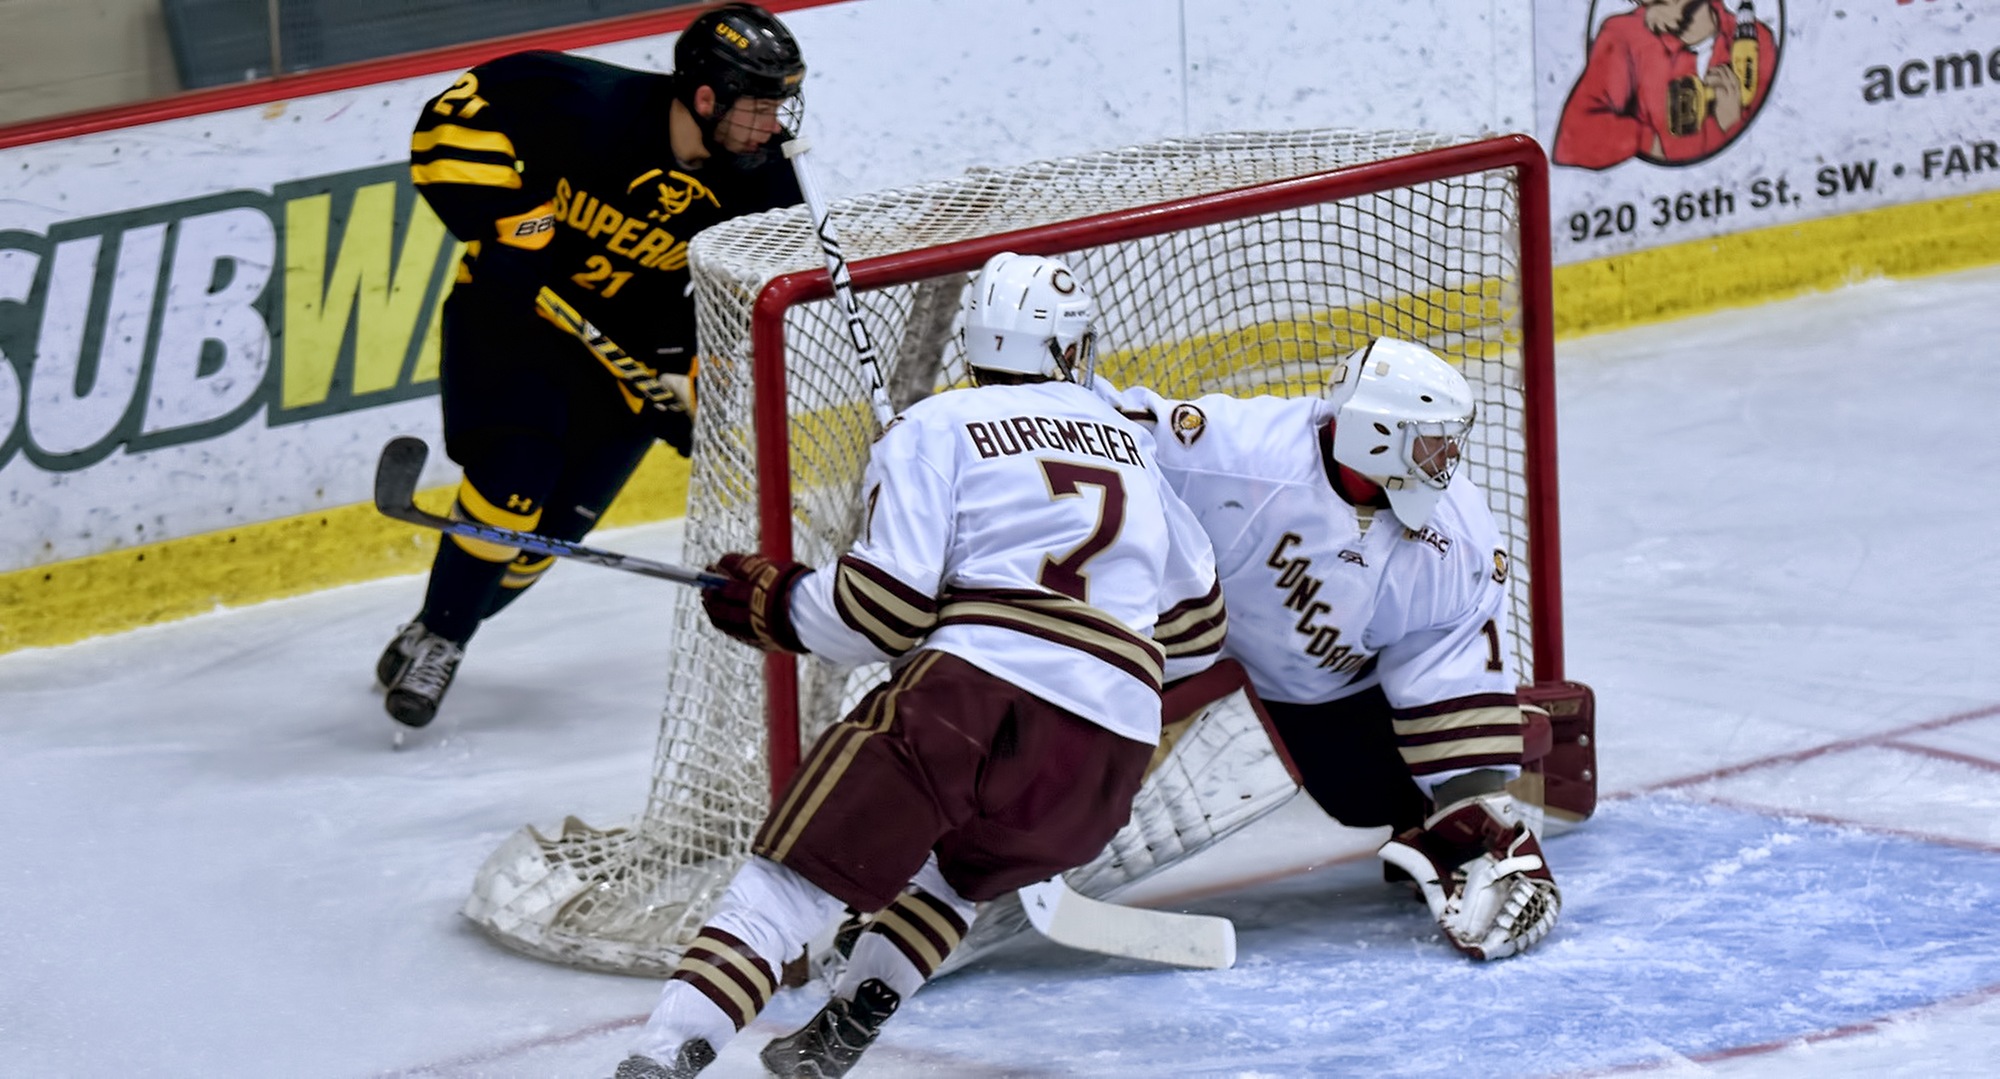 Senior goalie Jacob Stephan made 35 saves in the Cobbers' game at Wis.-Superior.